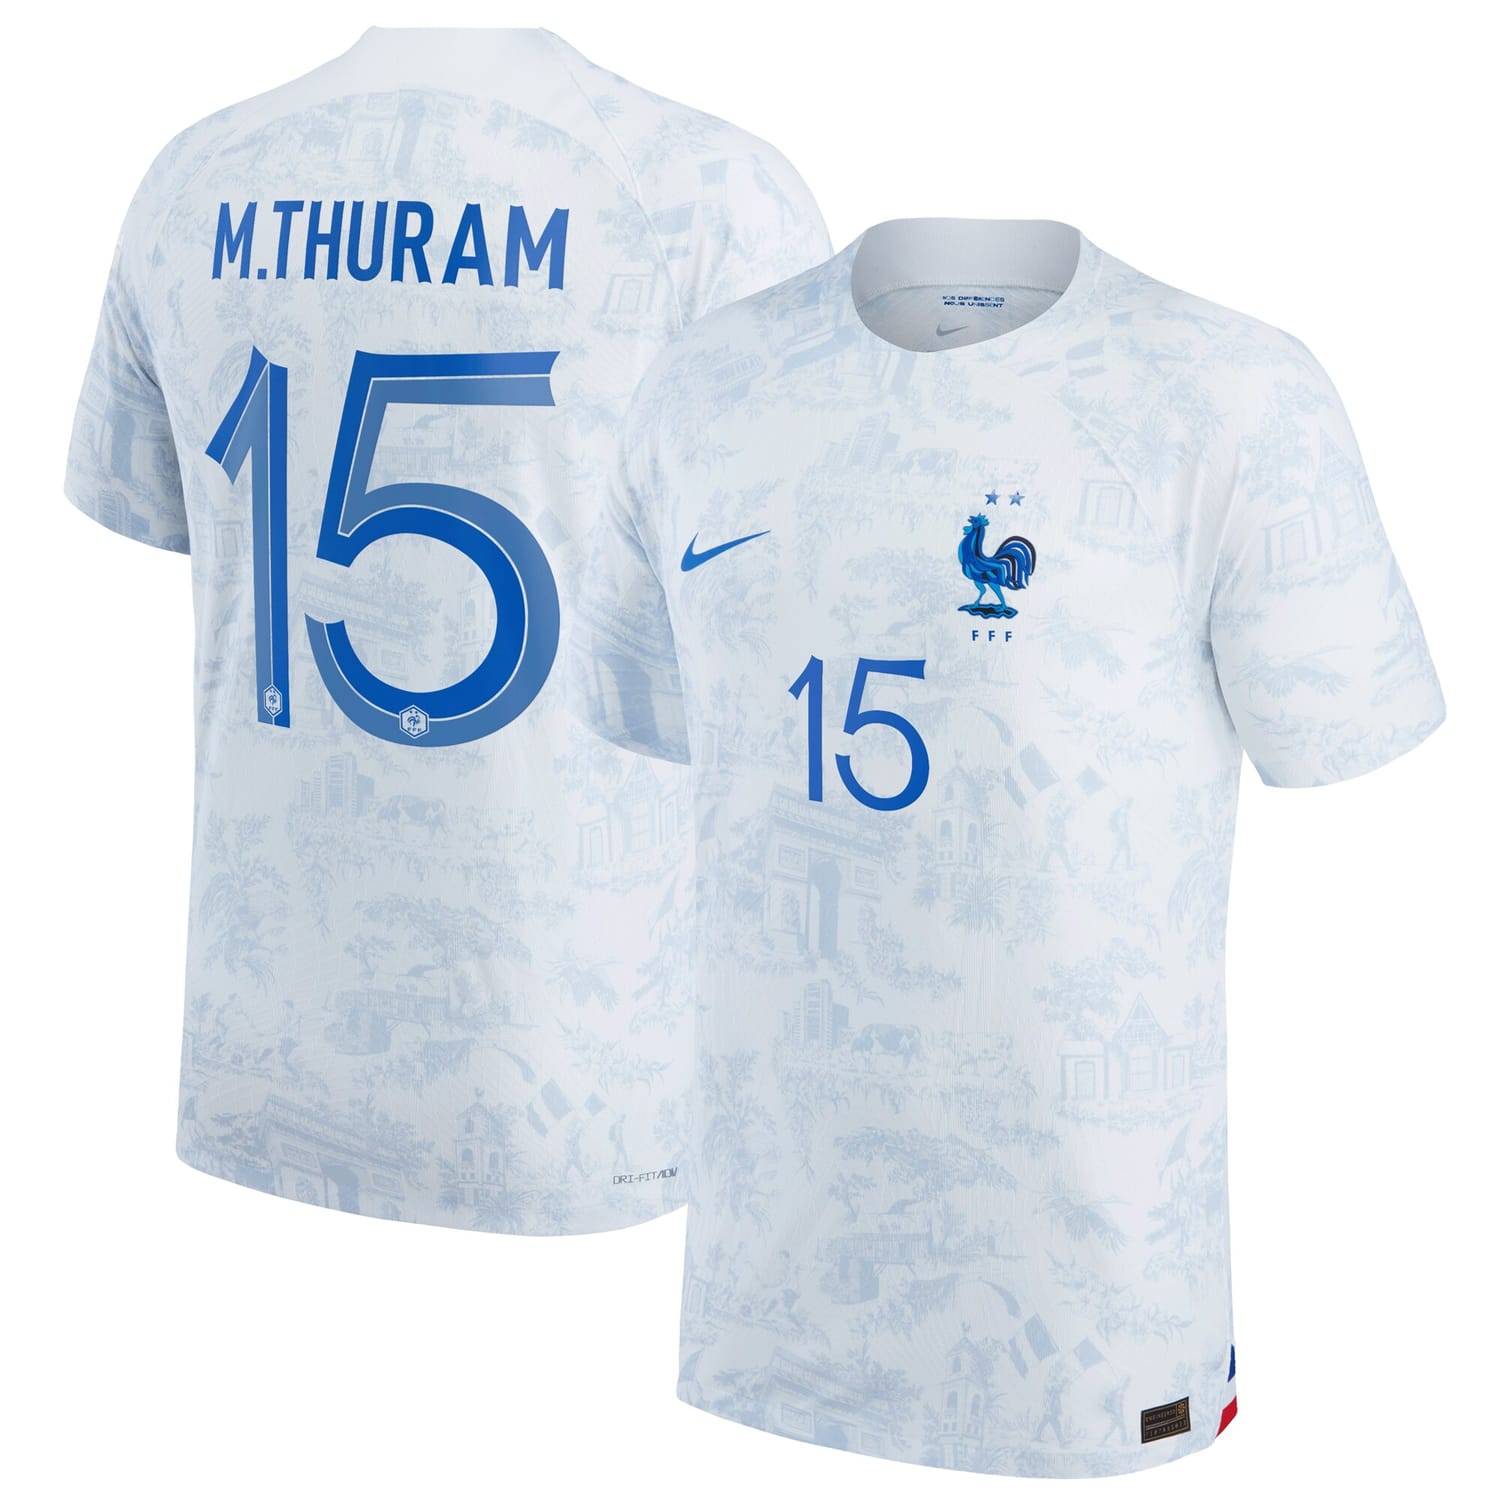 France National Team Away Authentic Jersey Shirt 2022 player Marcus Thuram 15 printing for Men